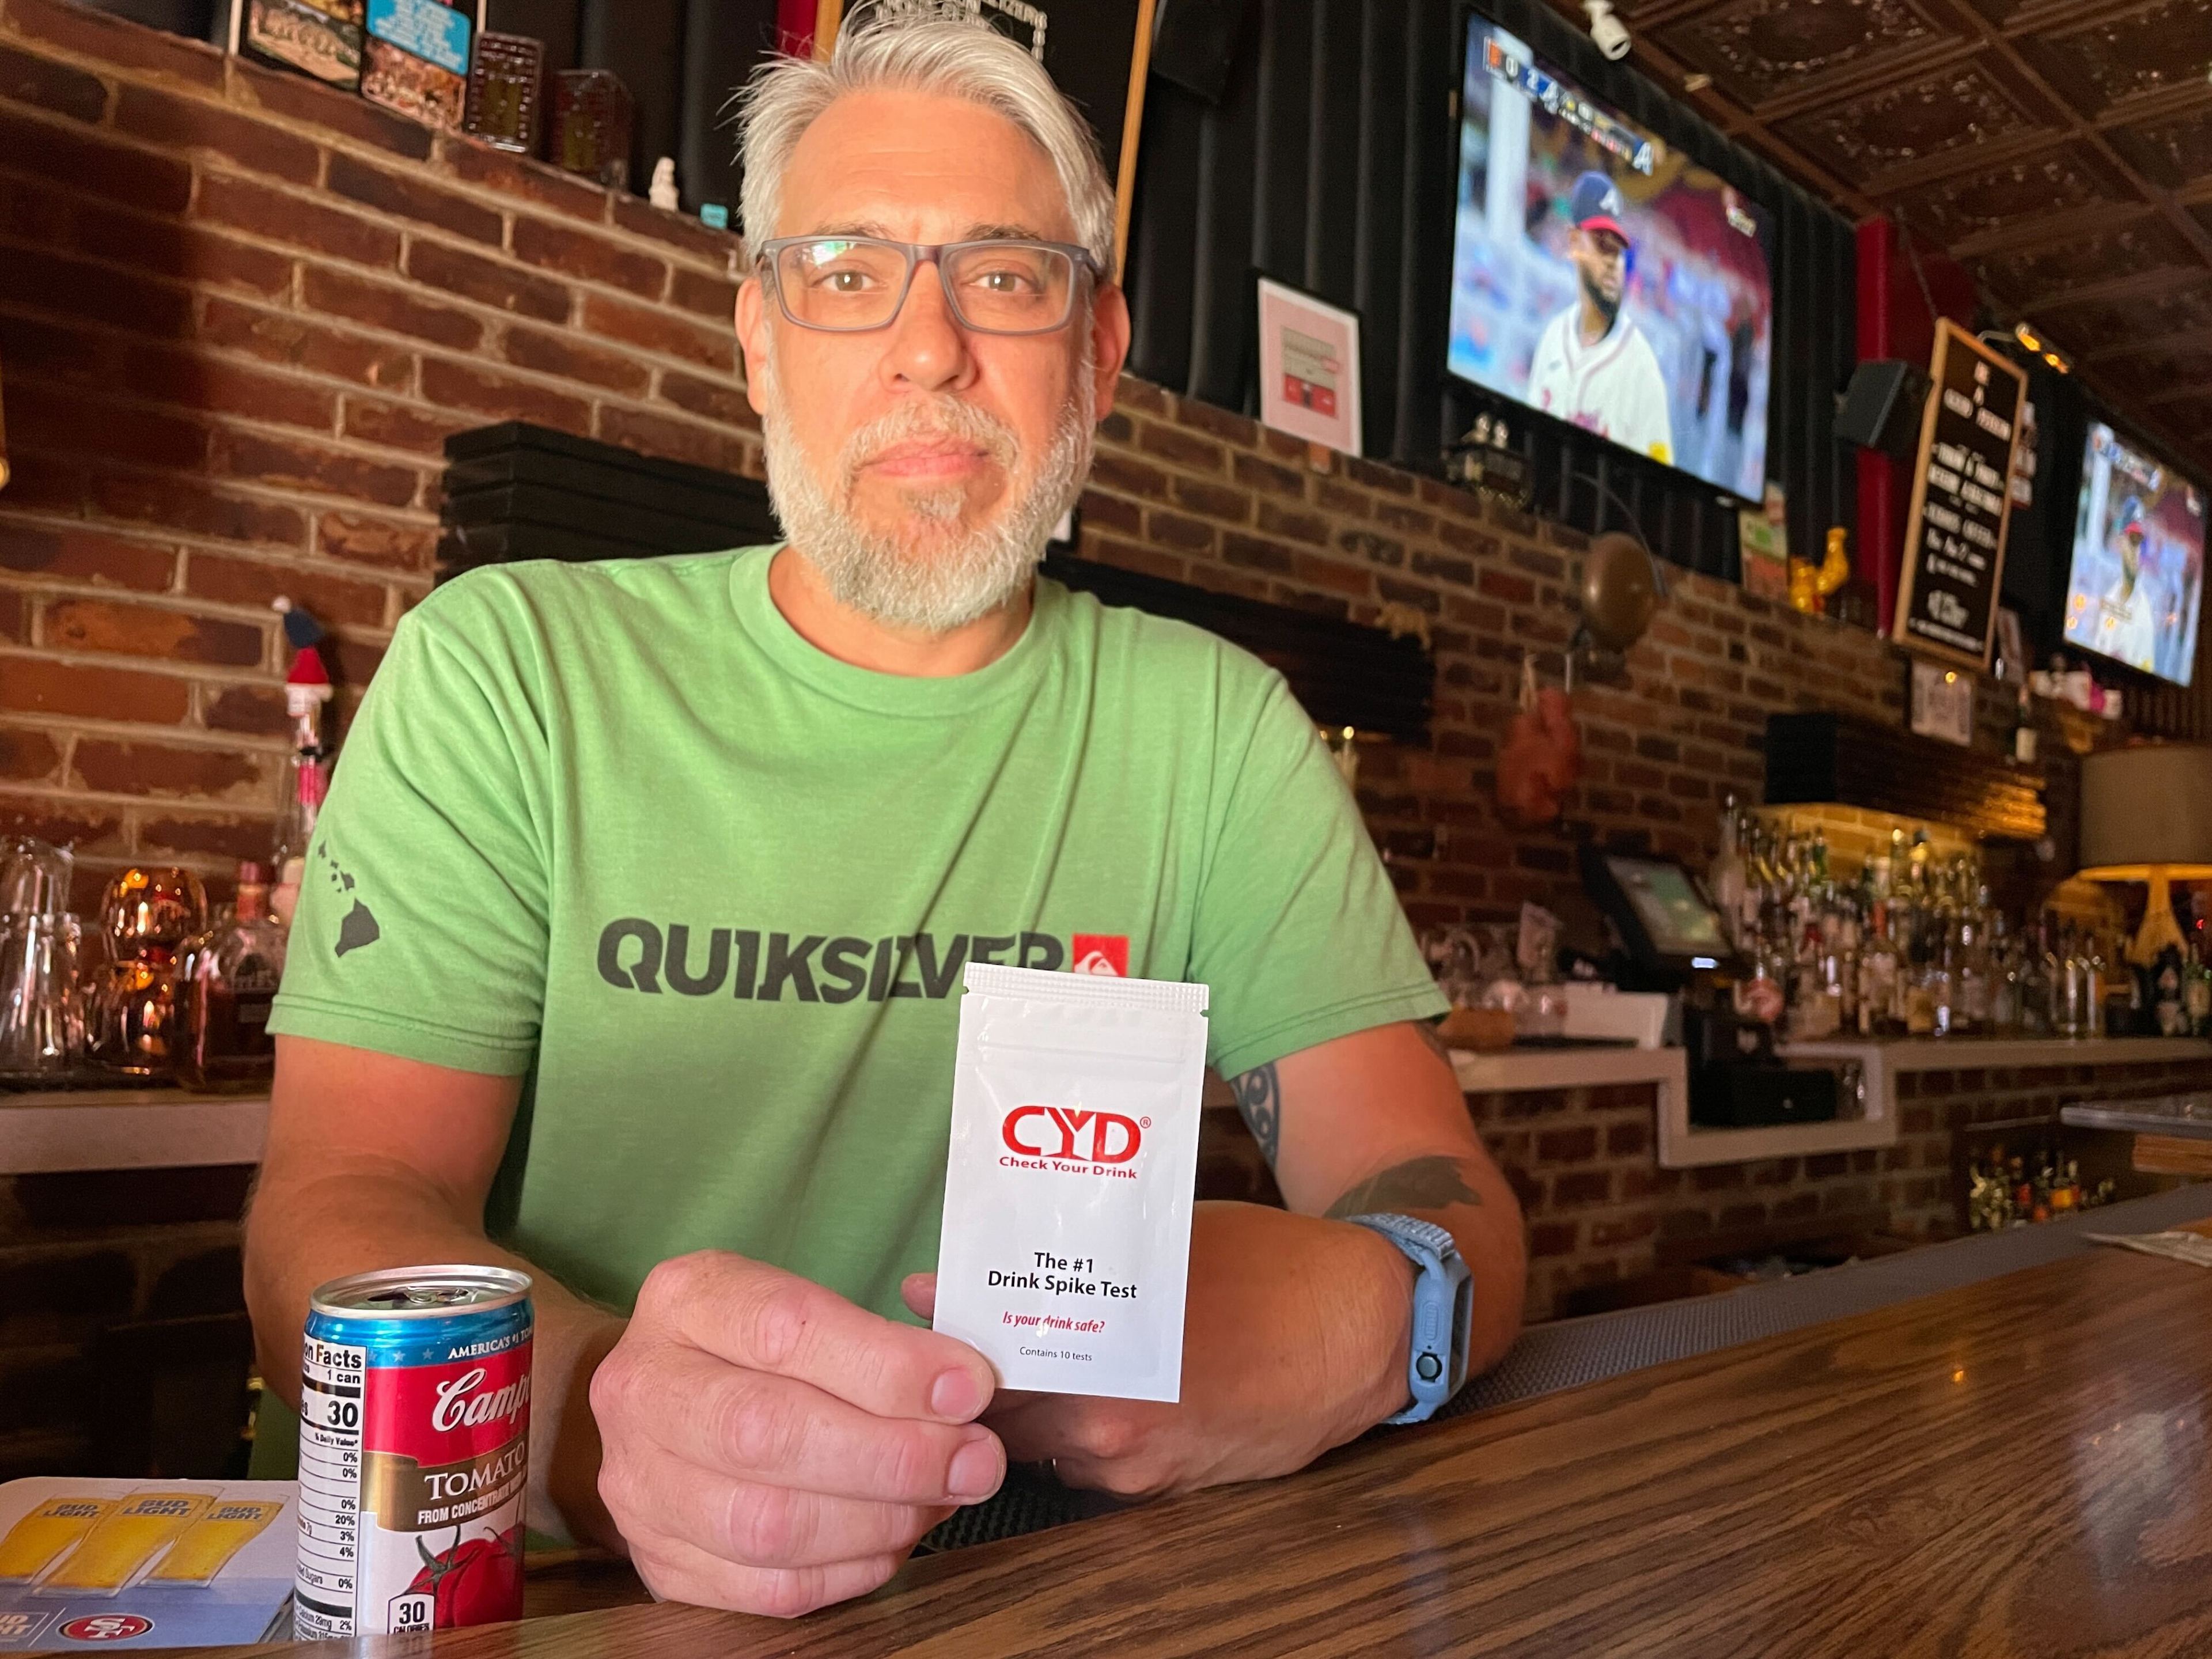 A man stands behind a bar holding a white package that says "Drink Spike Test" on the front.